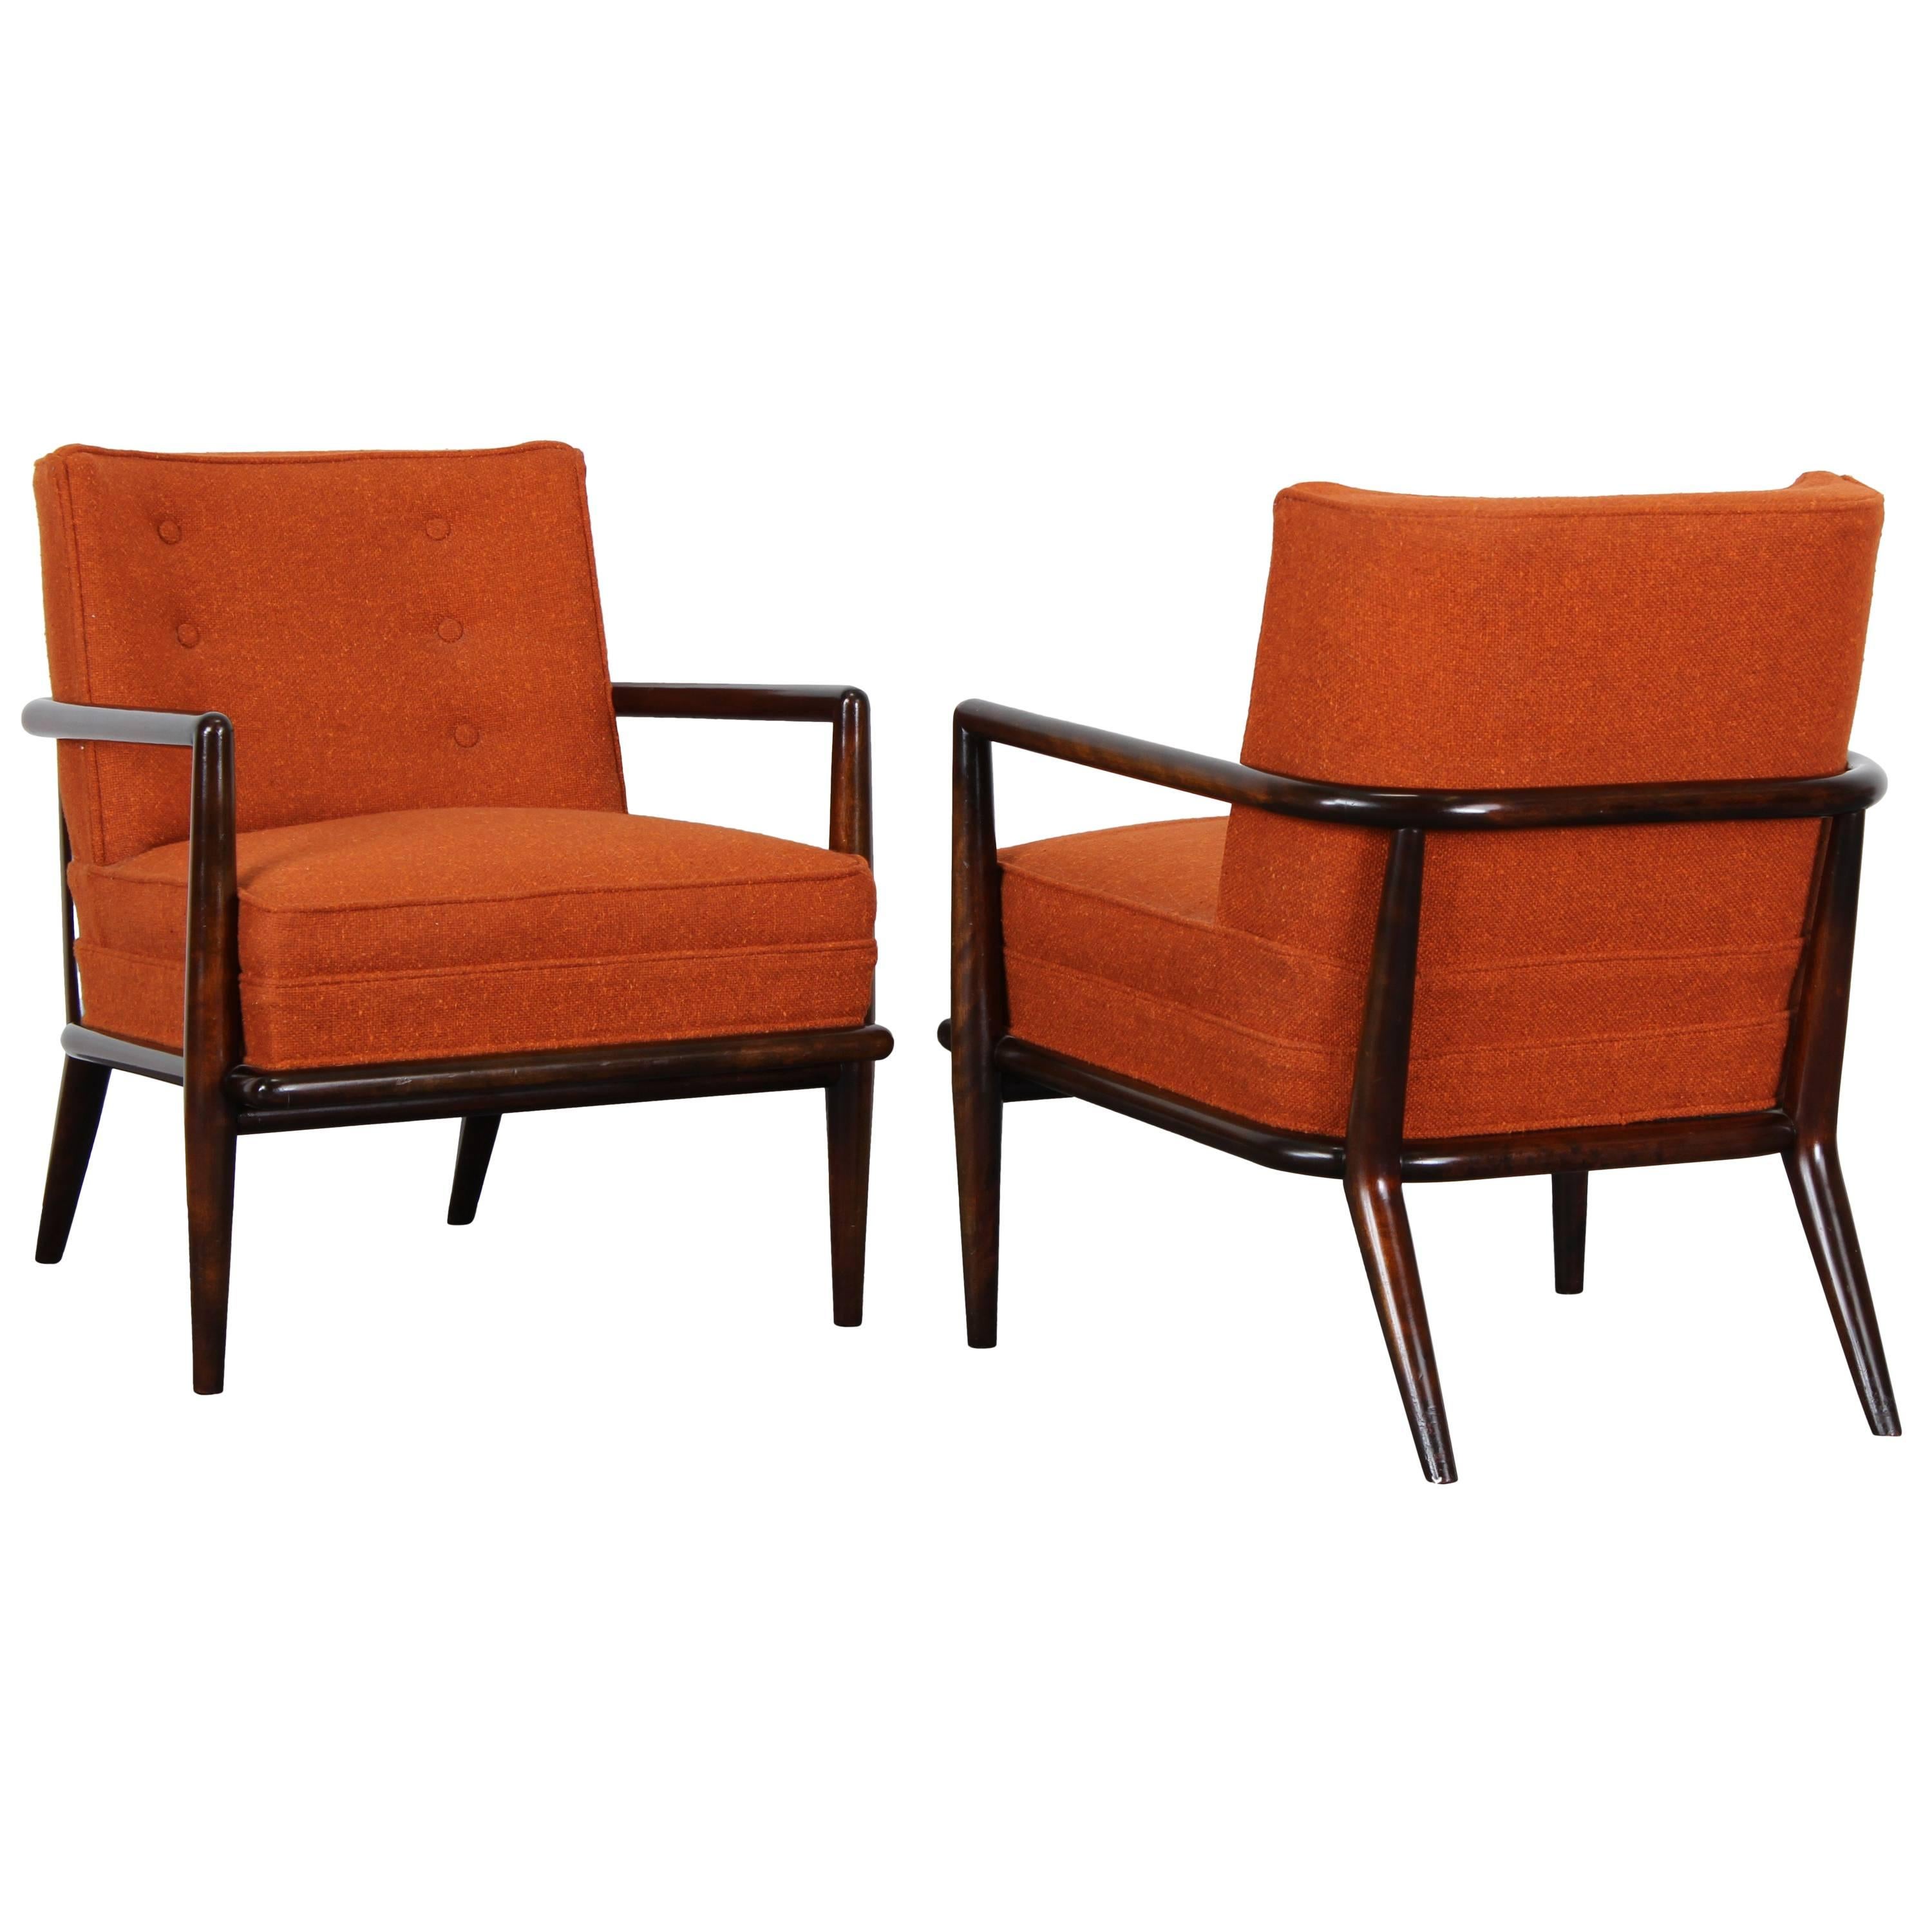 Pair of Lounge Chairs Model No. 1721 by T.H. Robsjohn-Gibbings, 1950s